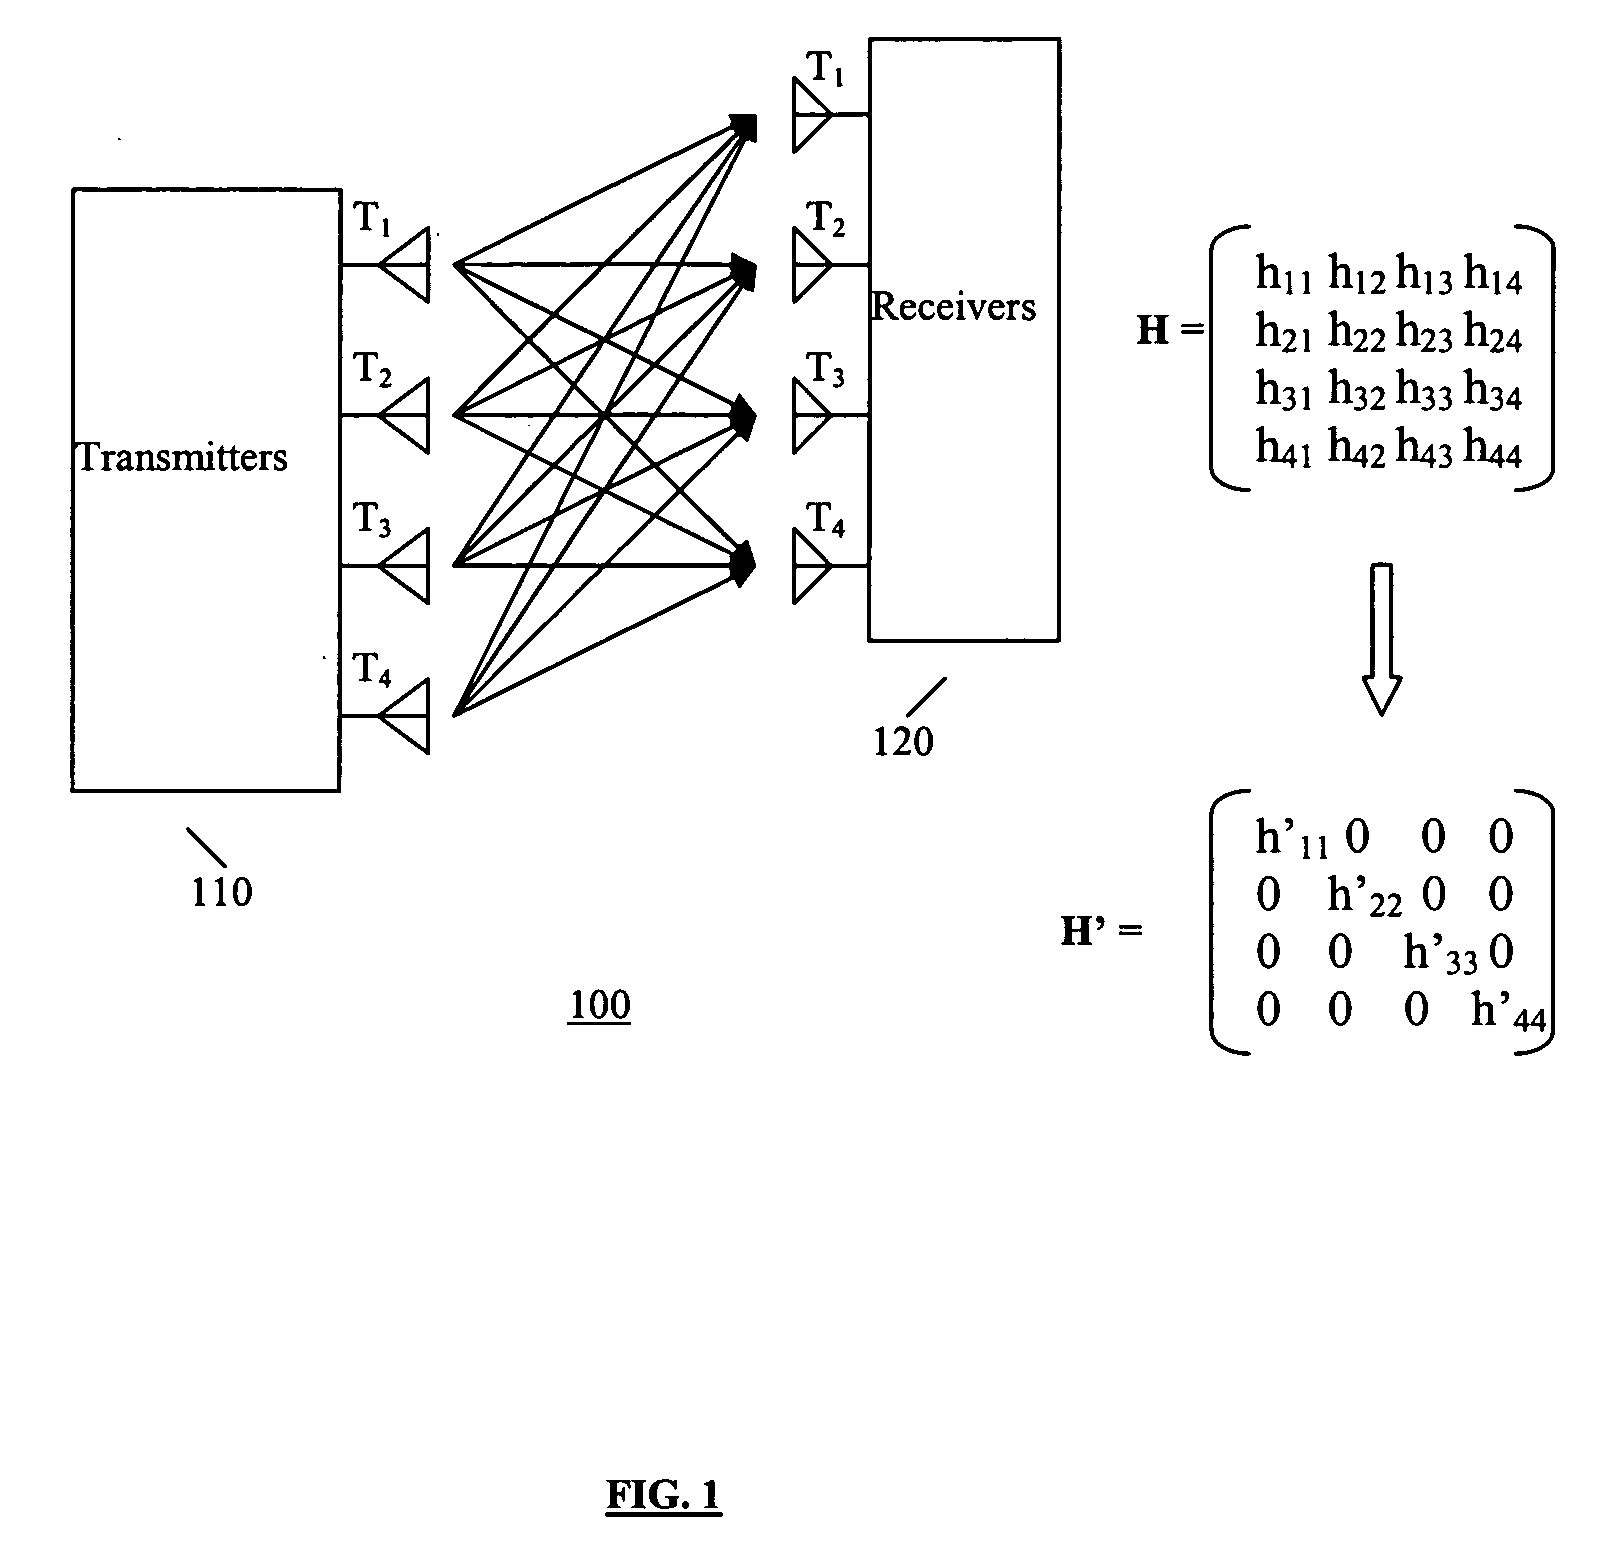 Method of maximizing MIMO system performance by joint optimization of diversity and spatial multiplexing